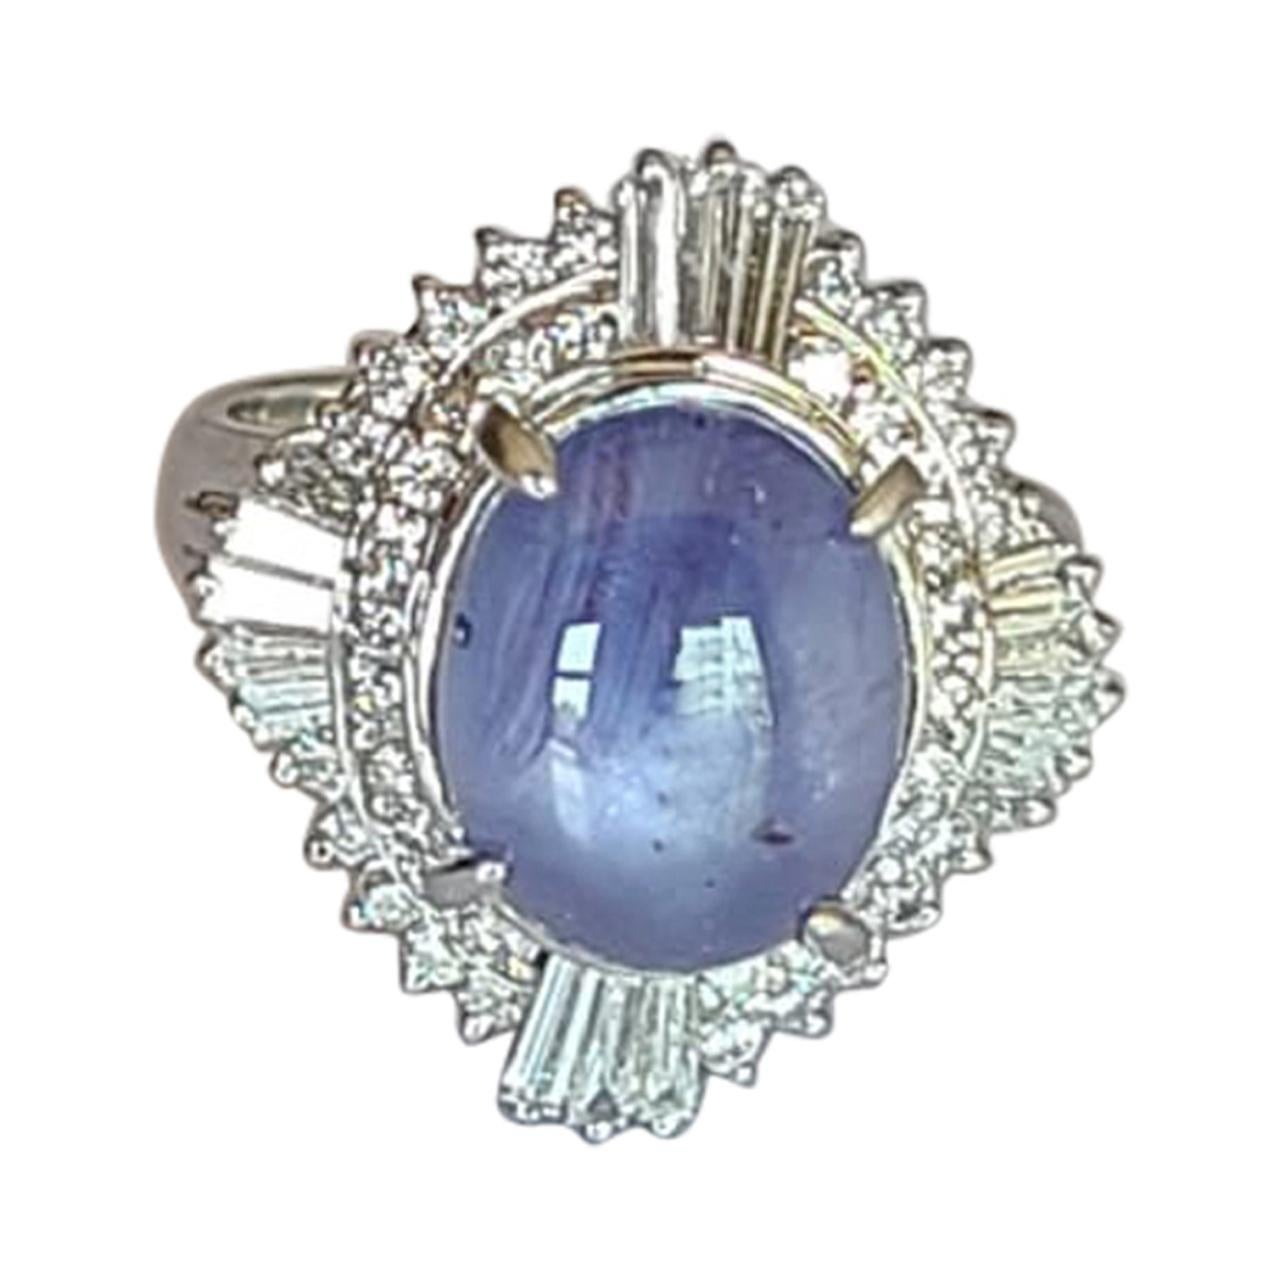 8.90 Carat Natural Star Sapphire Ring Set in Platinum with Diamonds